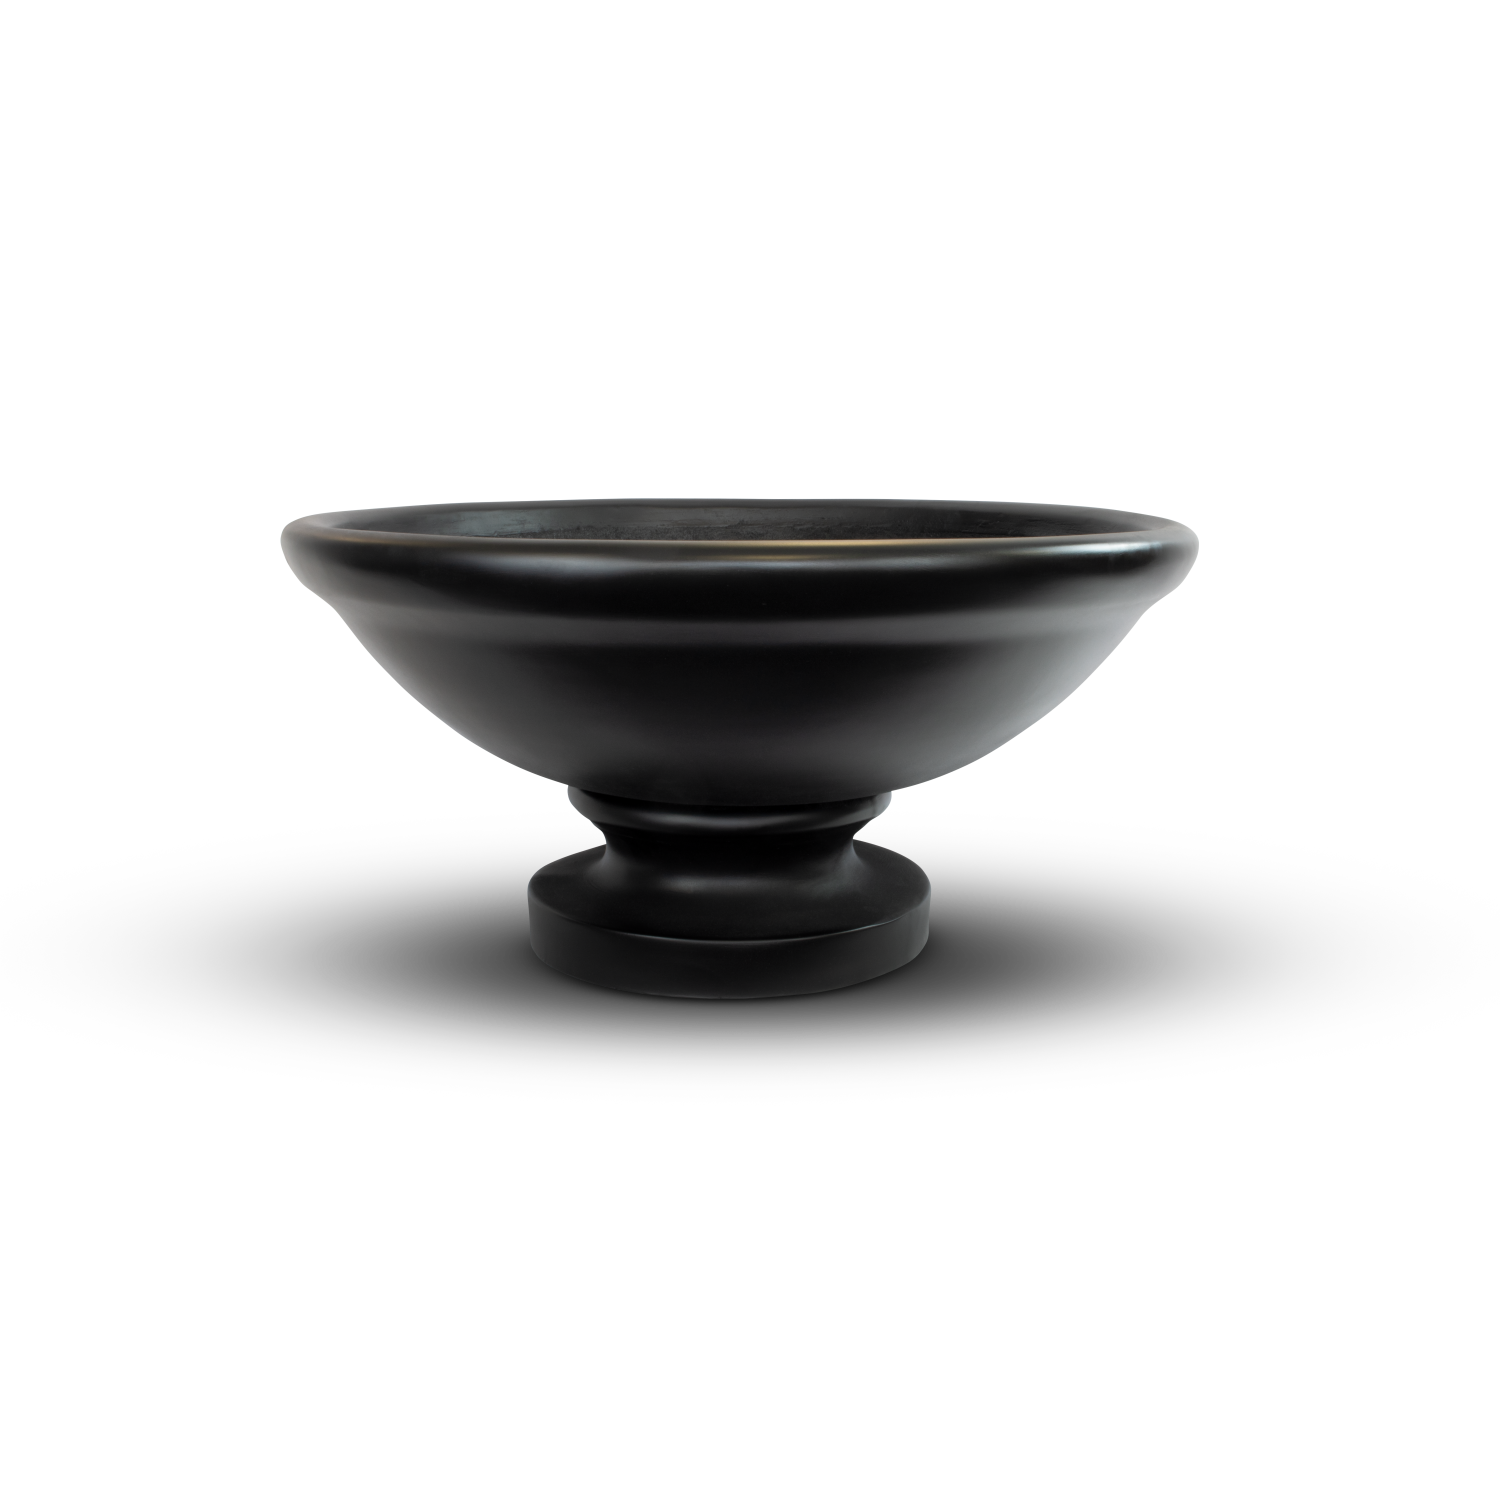 Banded Rim Fire Bowl Product Image